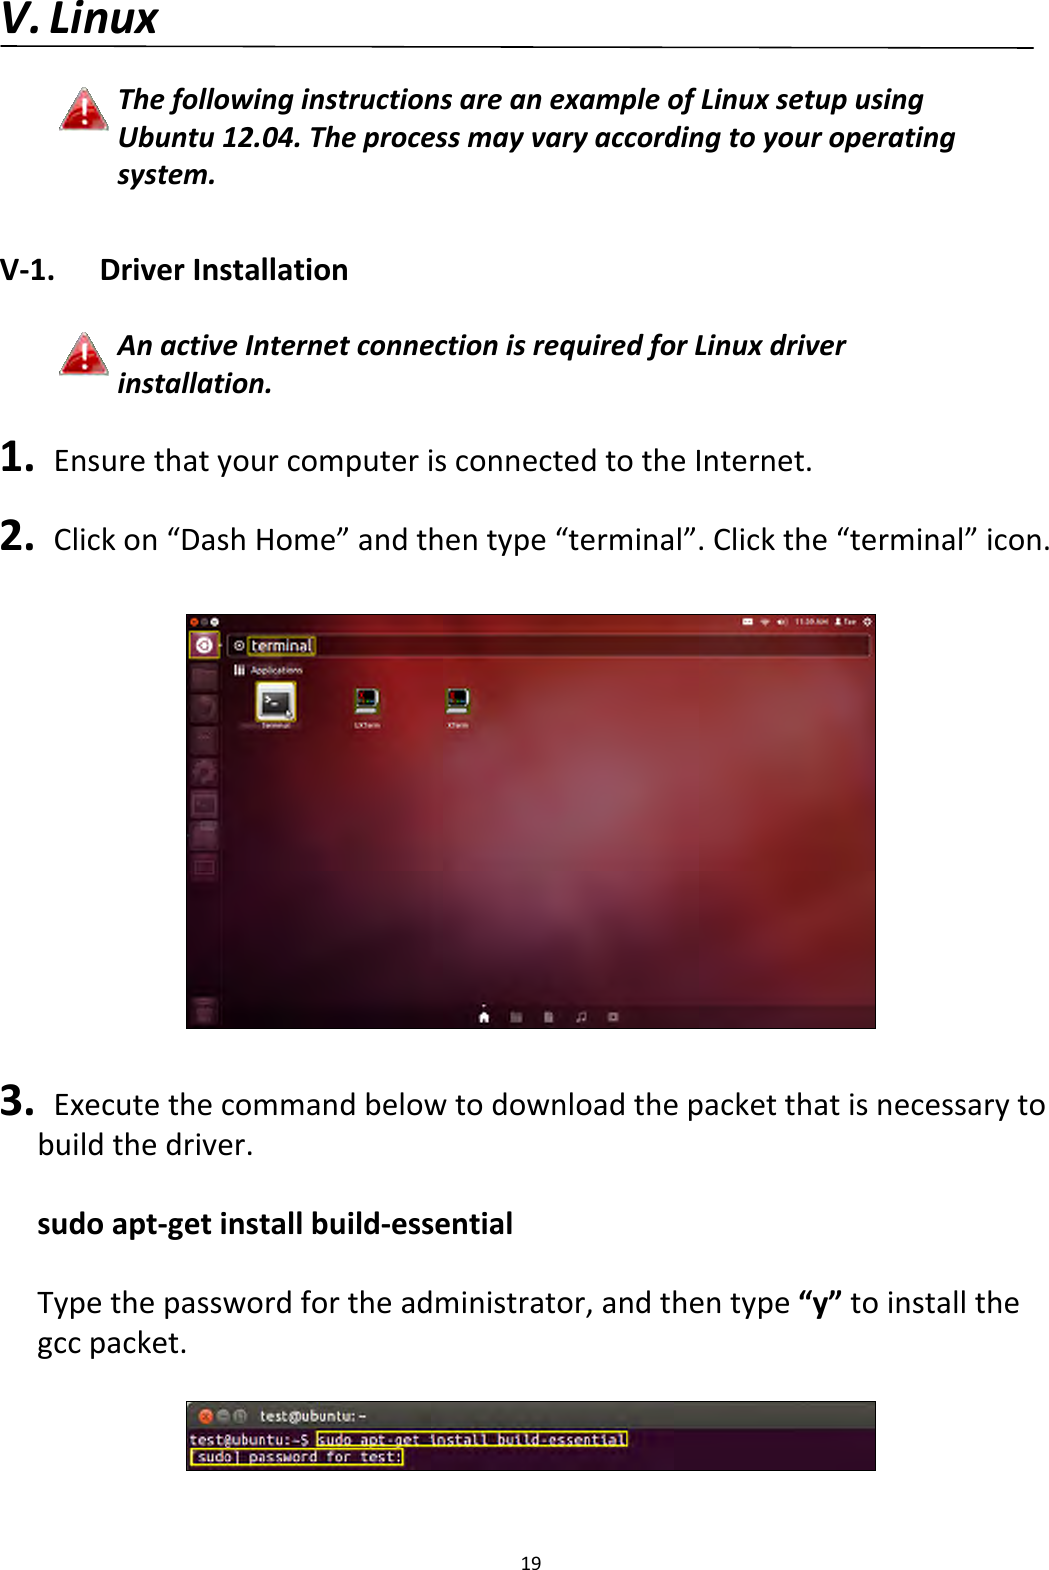 19V. LinuxThefollowinginstructionsareanexampleofLinuxsetupusingUbuntu12.04.Theprocessmayvaryaccordingtoyouroperatingsystem.V‐1.DriverInstallationAnactiveInternetconnectionisrequiredforLinuxdriverinstallation.1. EnsurethatyourcomputerisconnectedtotheInternet.2. Clickon“DashHome”andthentype“terminal”.Clickthe“terminal”icon.3. Executethecommandbelowtodownloadthepacketthatisnecessarytobuildthedriver.sudoapt‐getinstallbuild‐essentialTypethepasswordfortheadministrator,andthentype“y”toinstallthegccpacket.